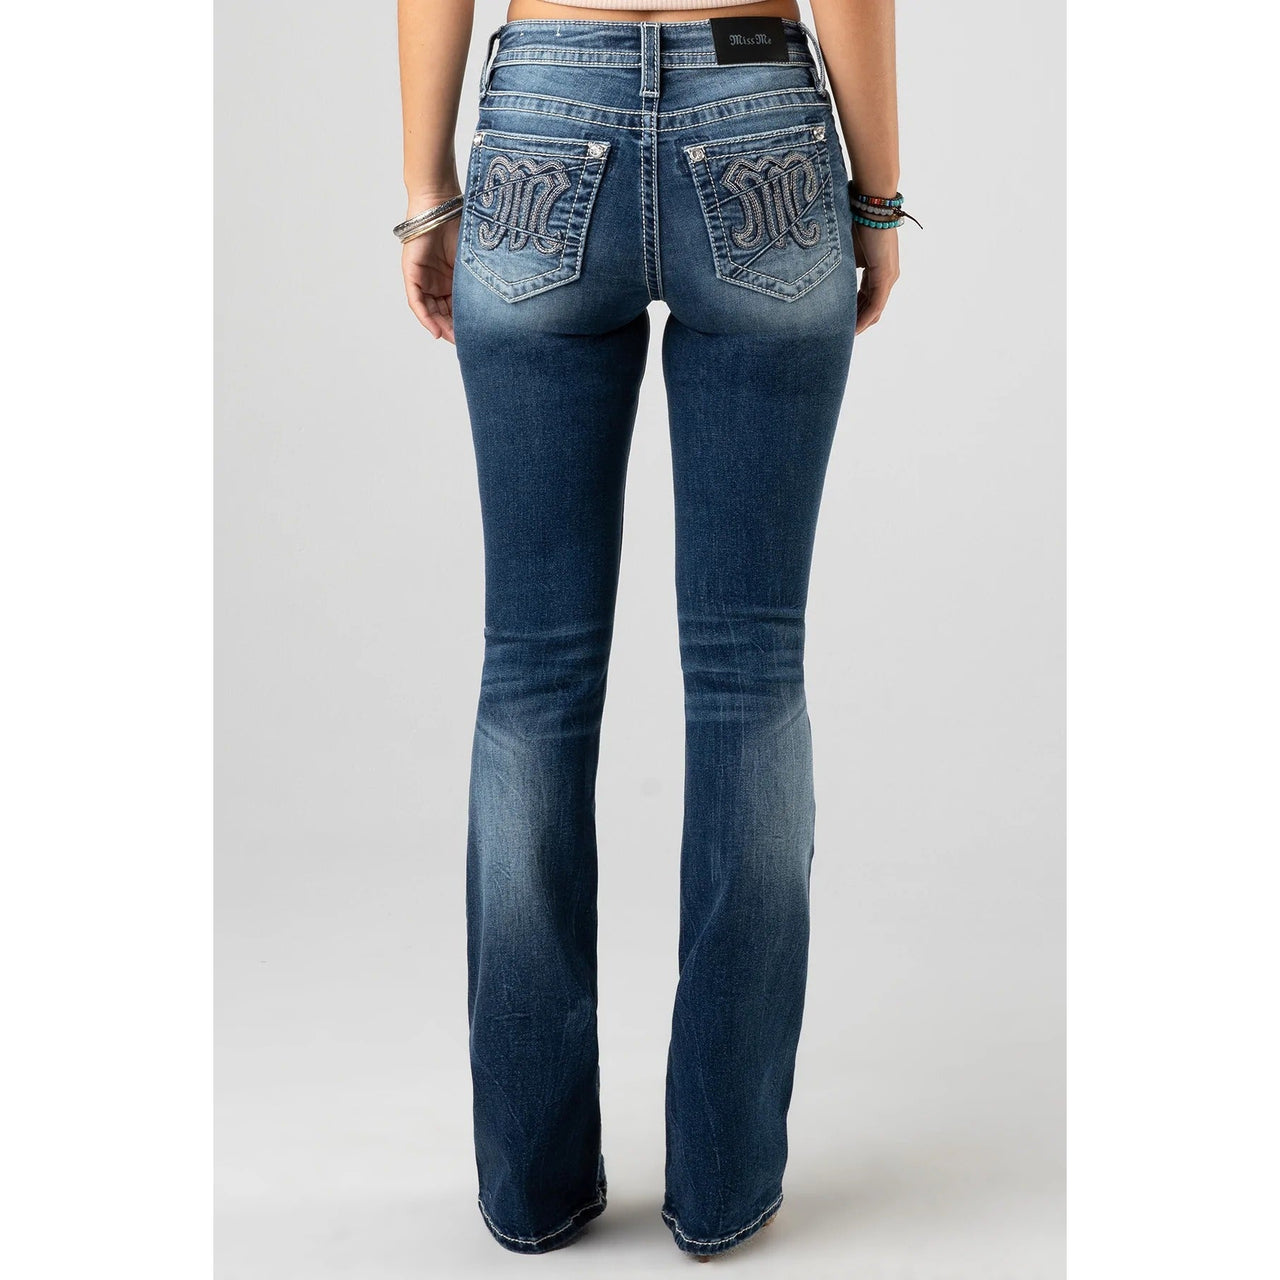 Miss Me Women's Mid Rise Bootcut Jeans M5014B368 - Russell's